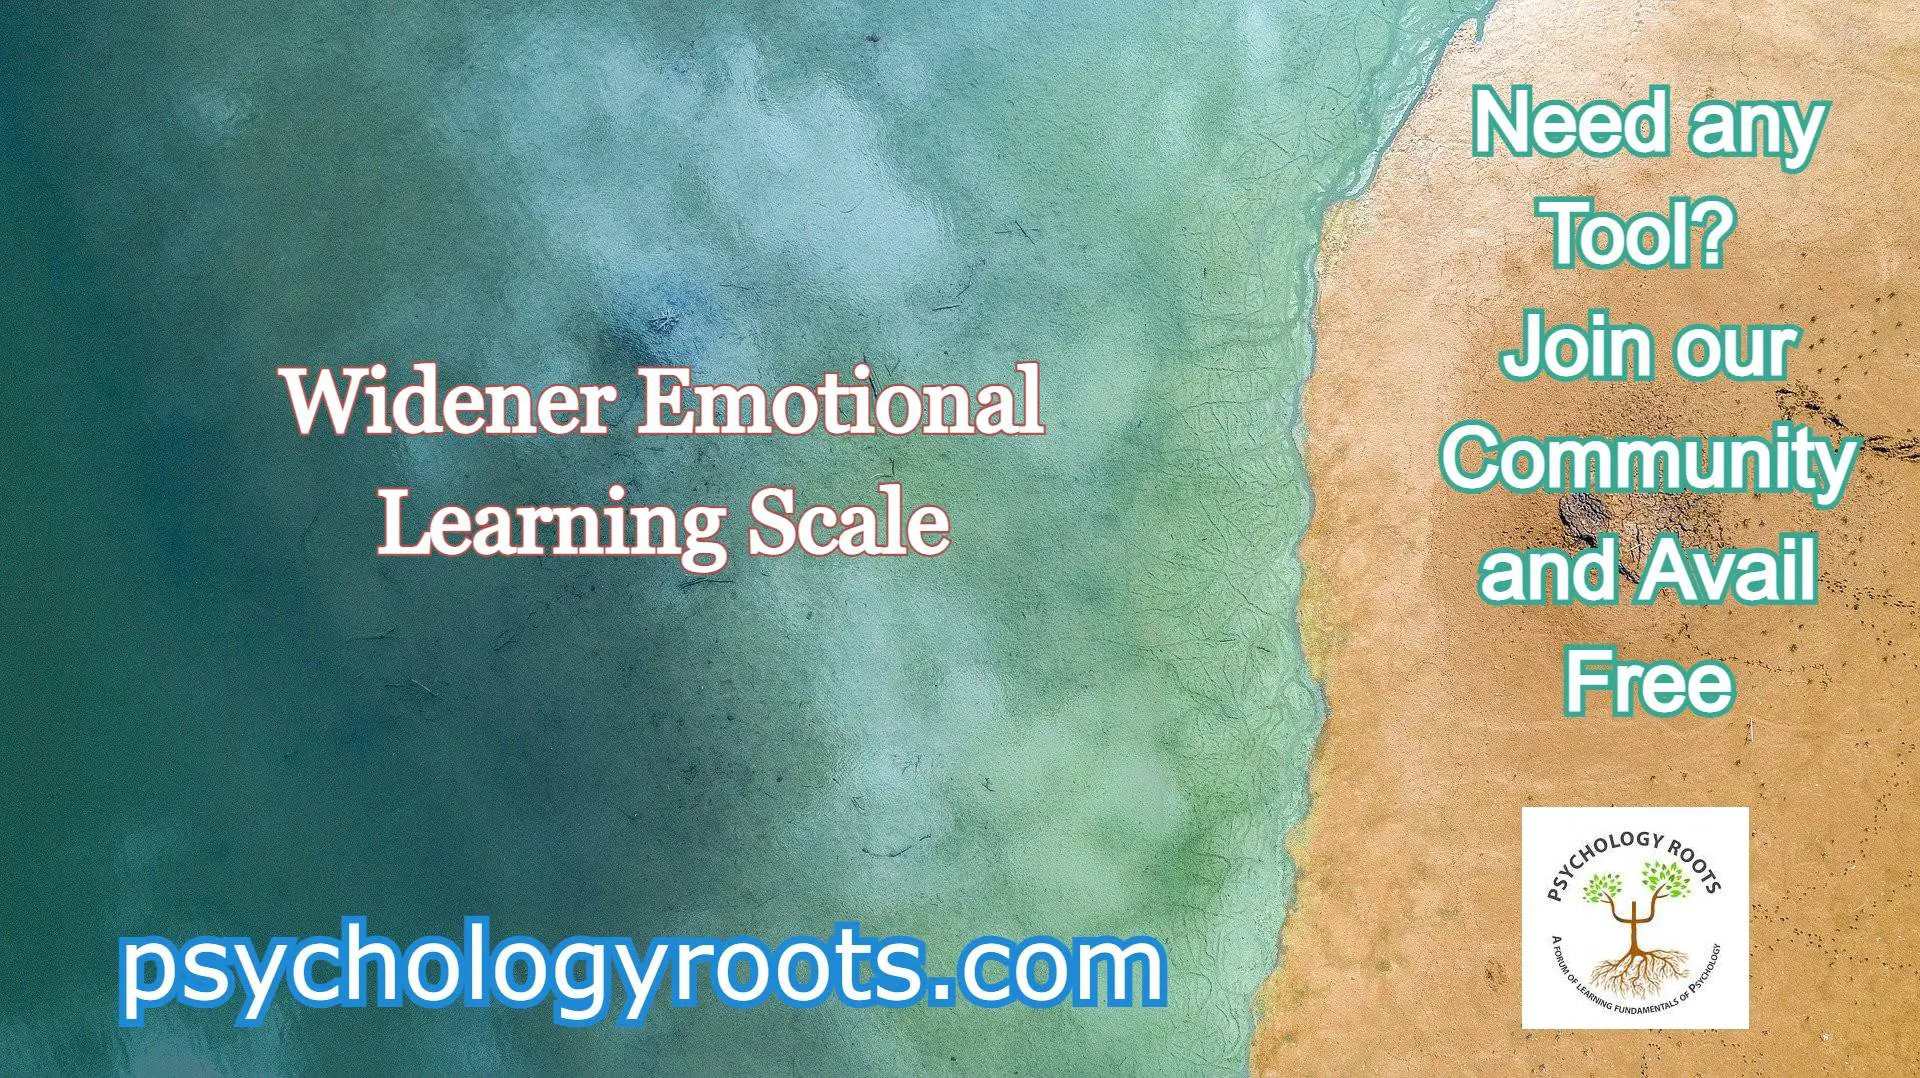 Widener Emotional Learning Scale